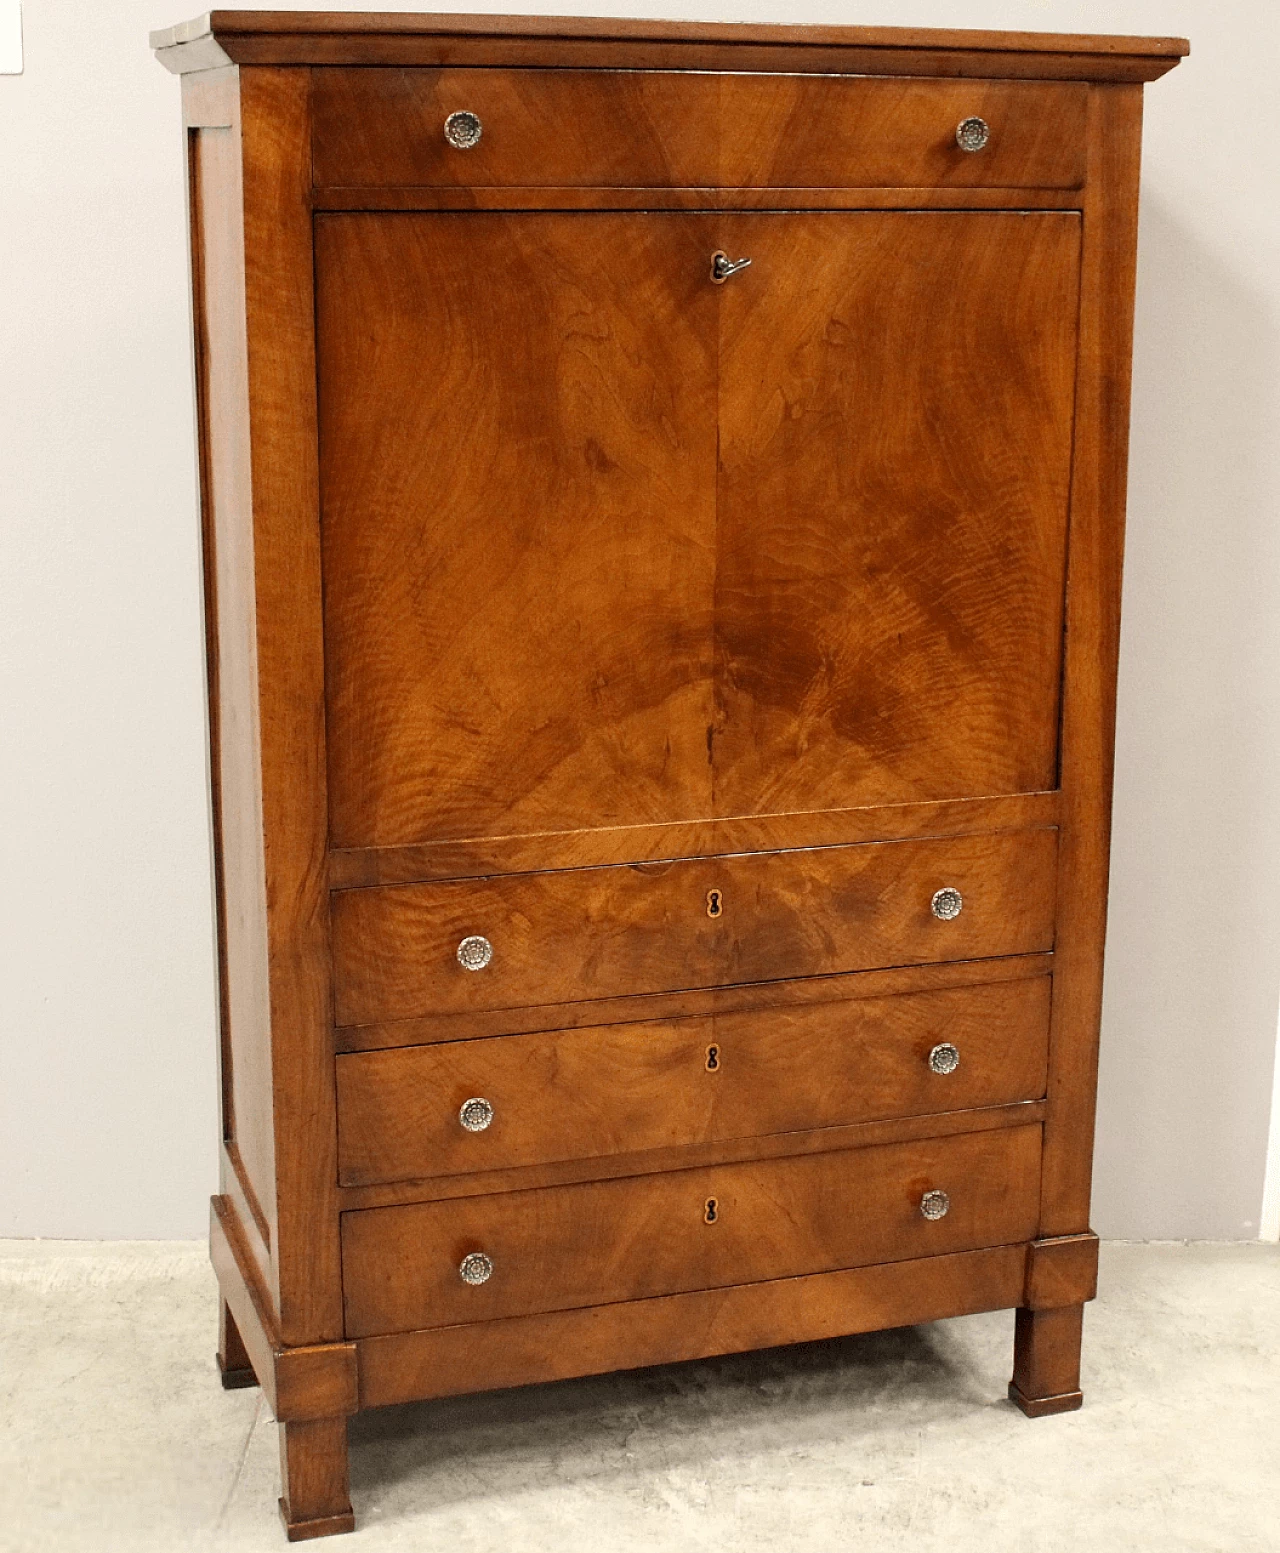 Empire solid walnut and walnut paneled secrétaire, early 19th century 1